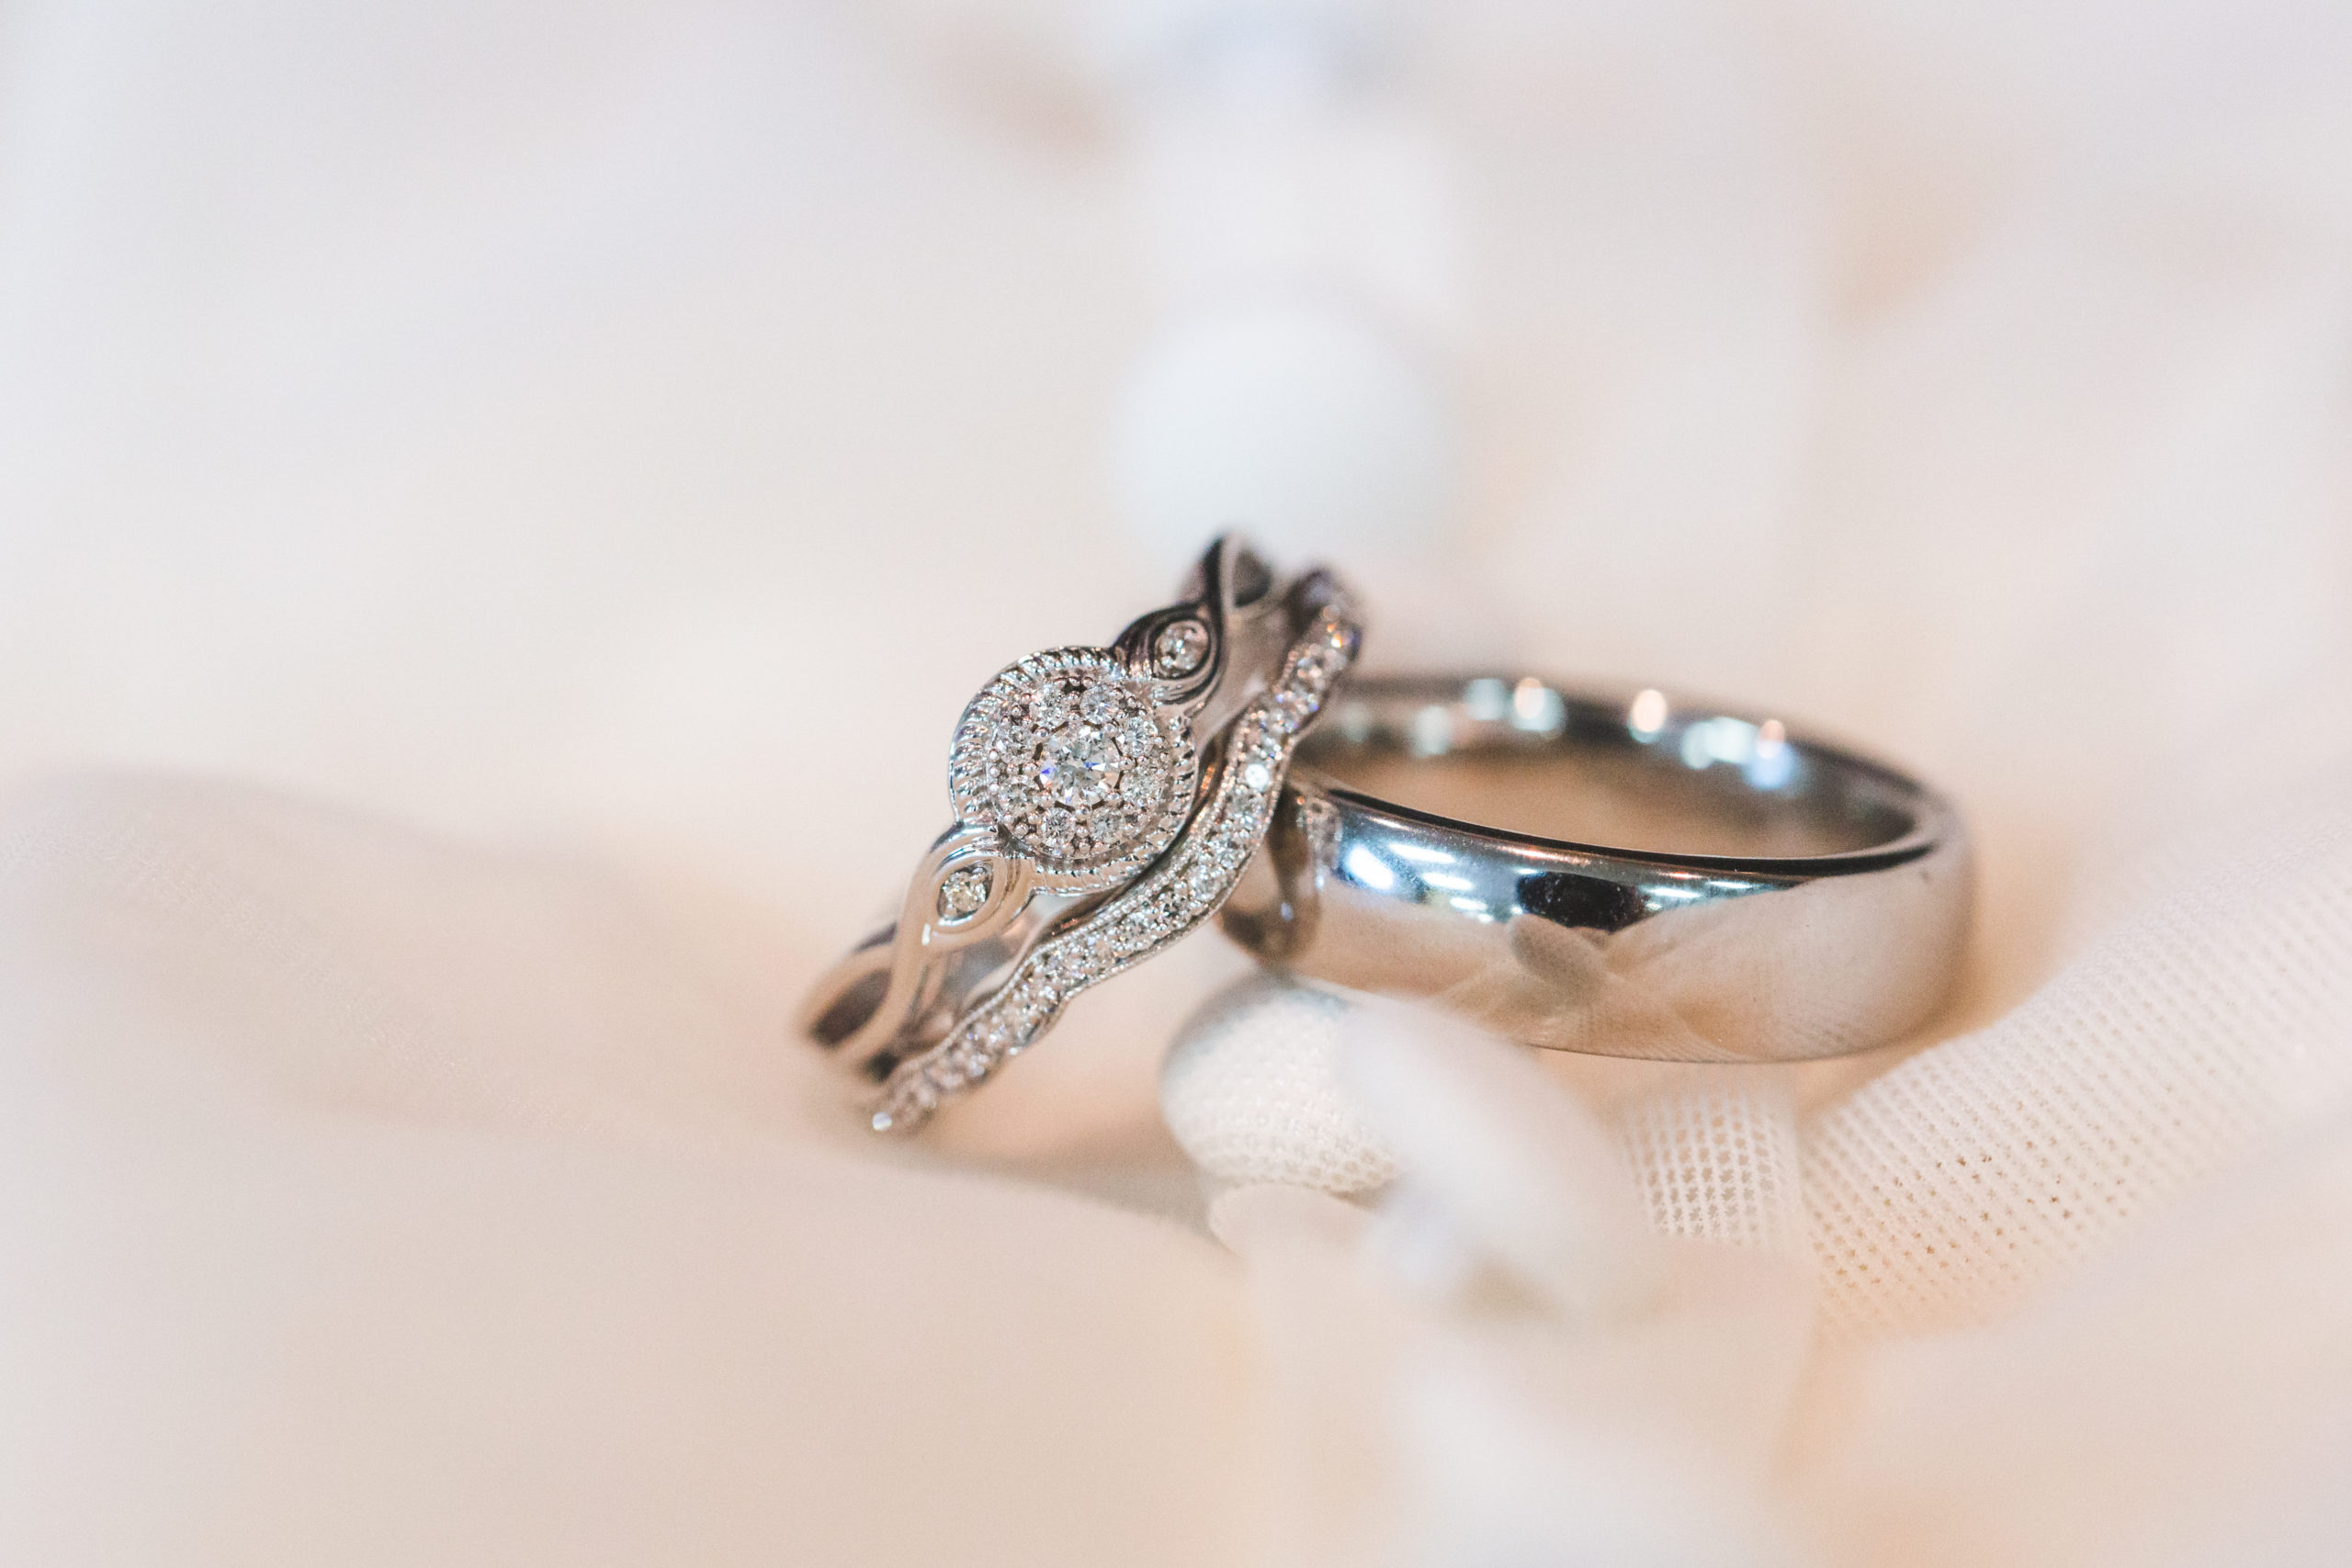 Tips For a More Photogenic Wedding rings on dress buttons